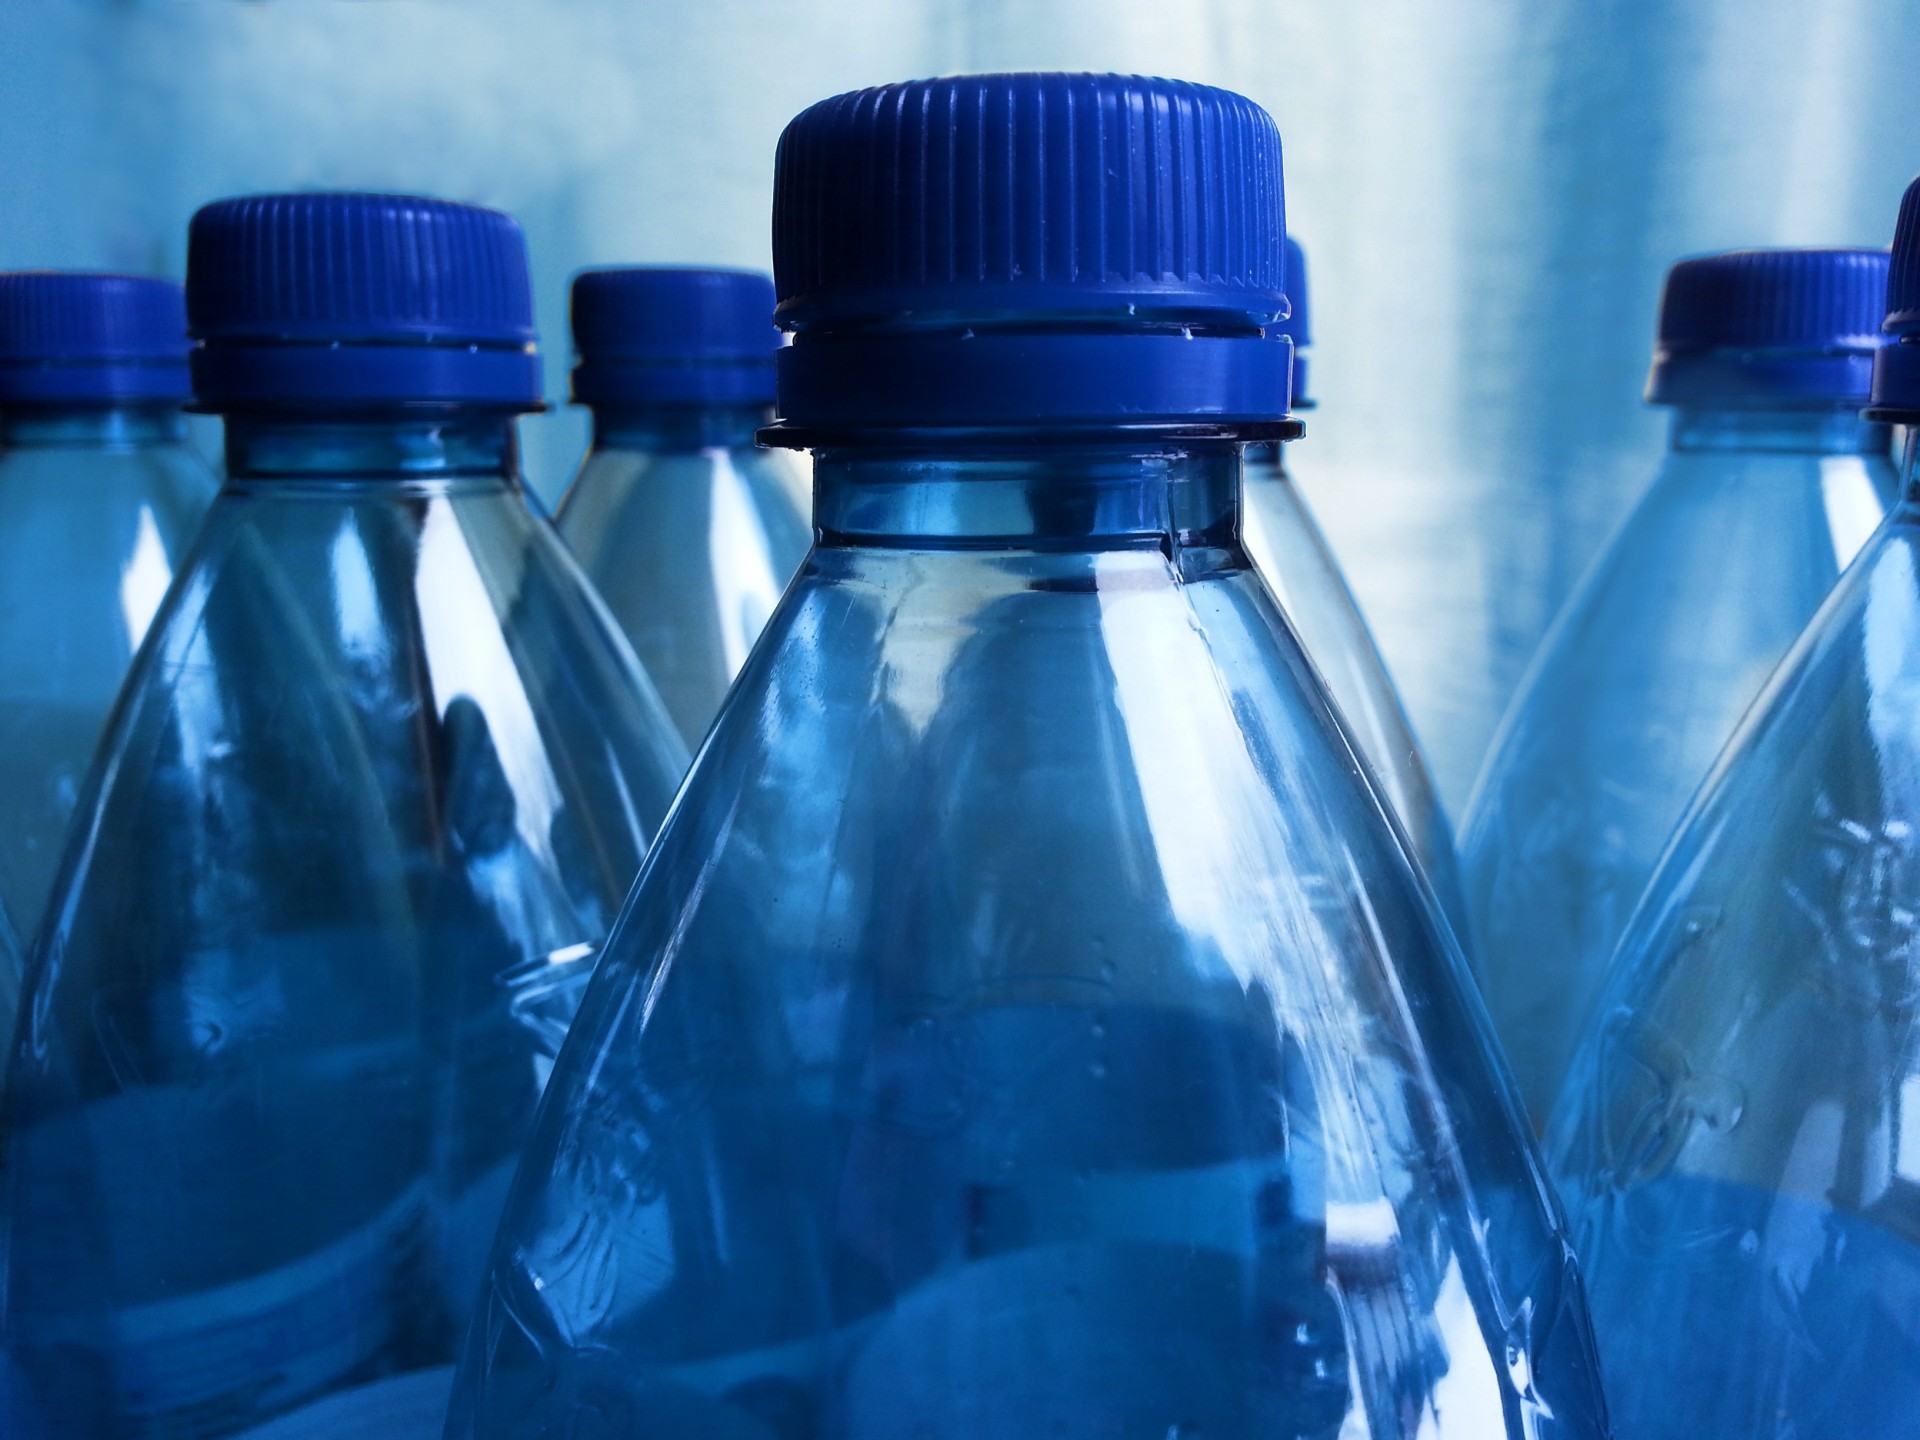 Industry Response to Research Claiming to Have Found Microplastic Particles in Bottled Water